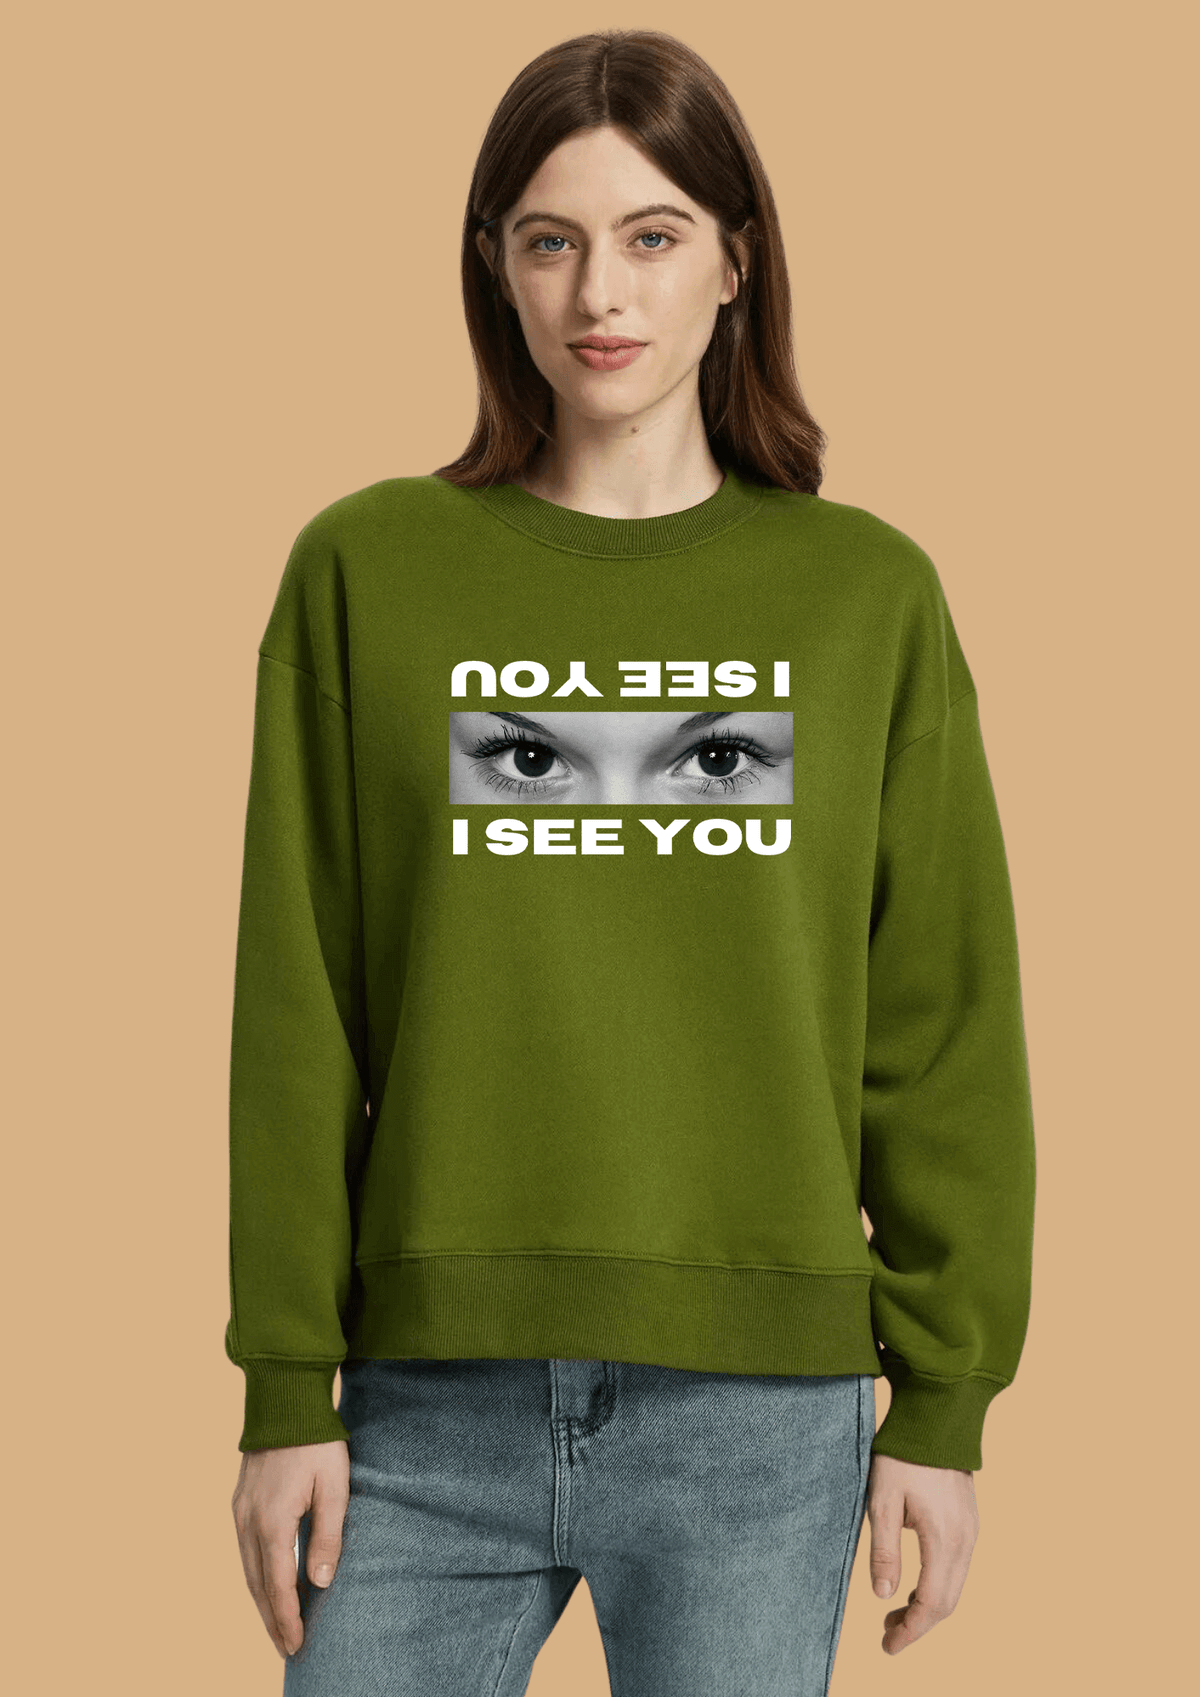 I see you printed olive green color sweatshirt by offmint